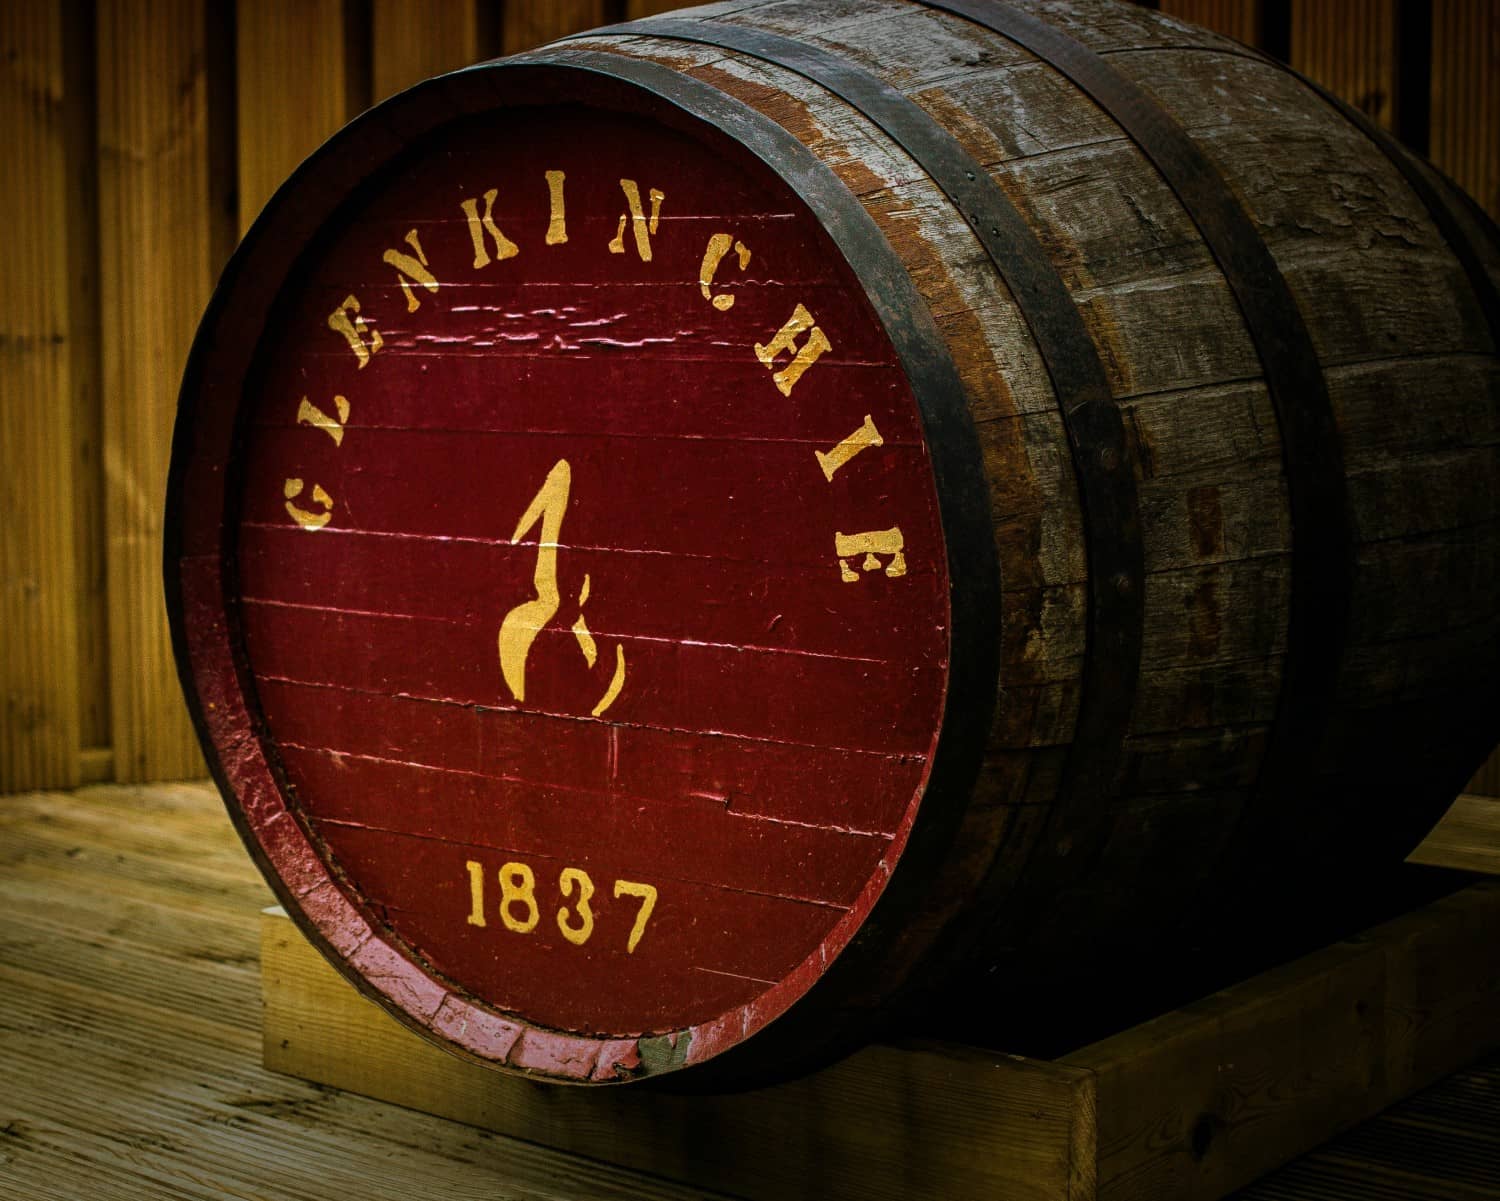 How does whisky get its age? The oak barrels are just part of the answer